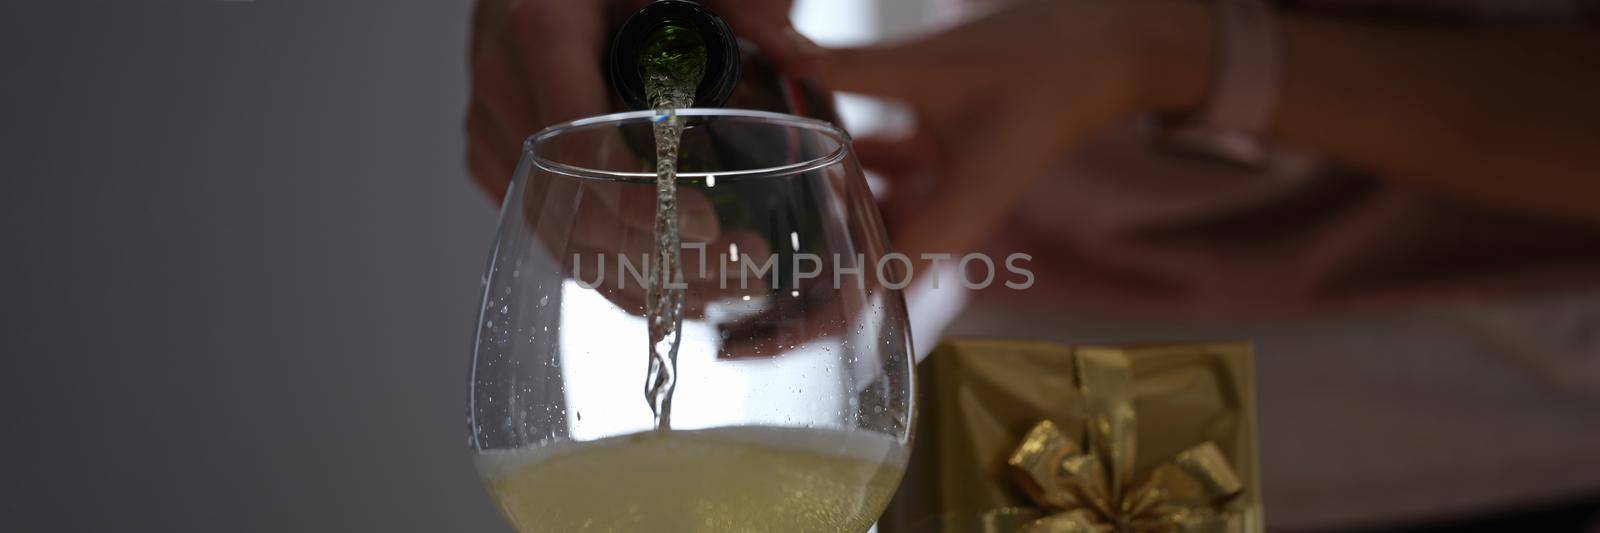 A woman pours champagne from a bottle into a glass, celebration. Family holiday event, wedding anniversary, surprise